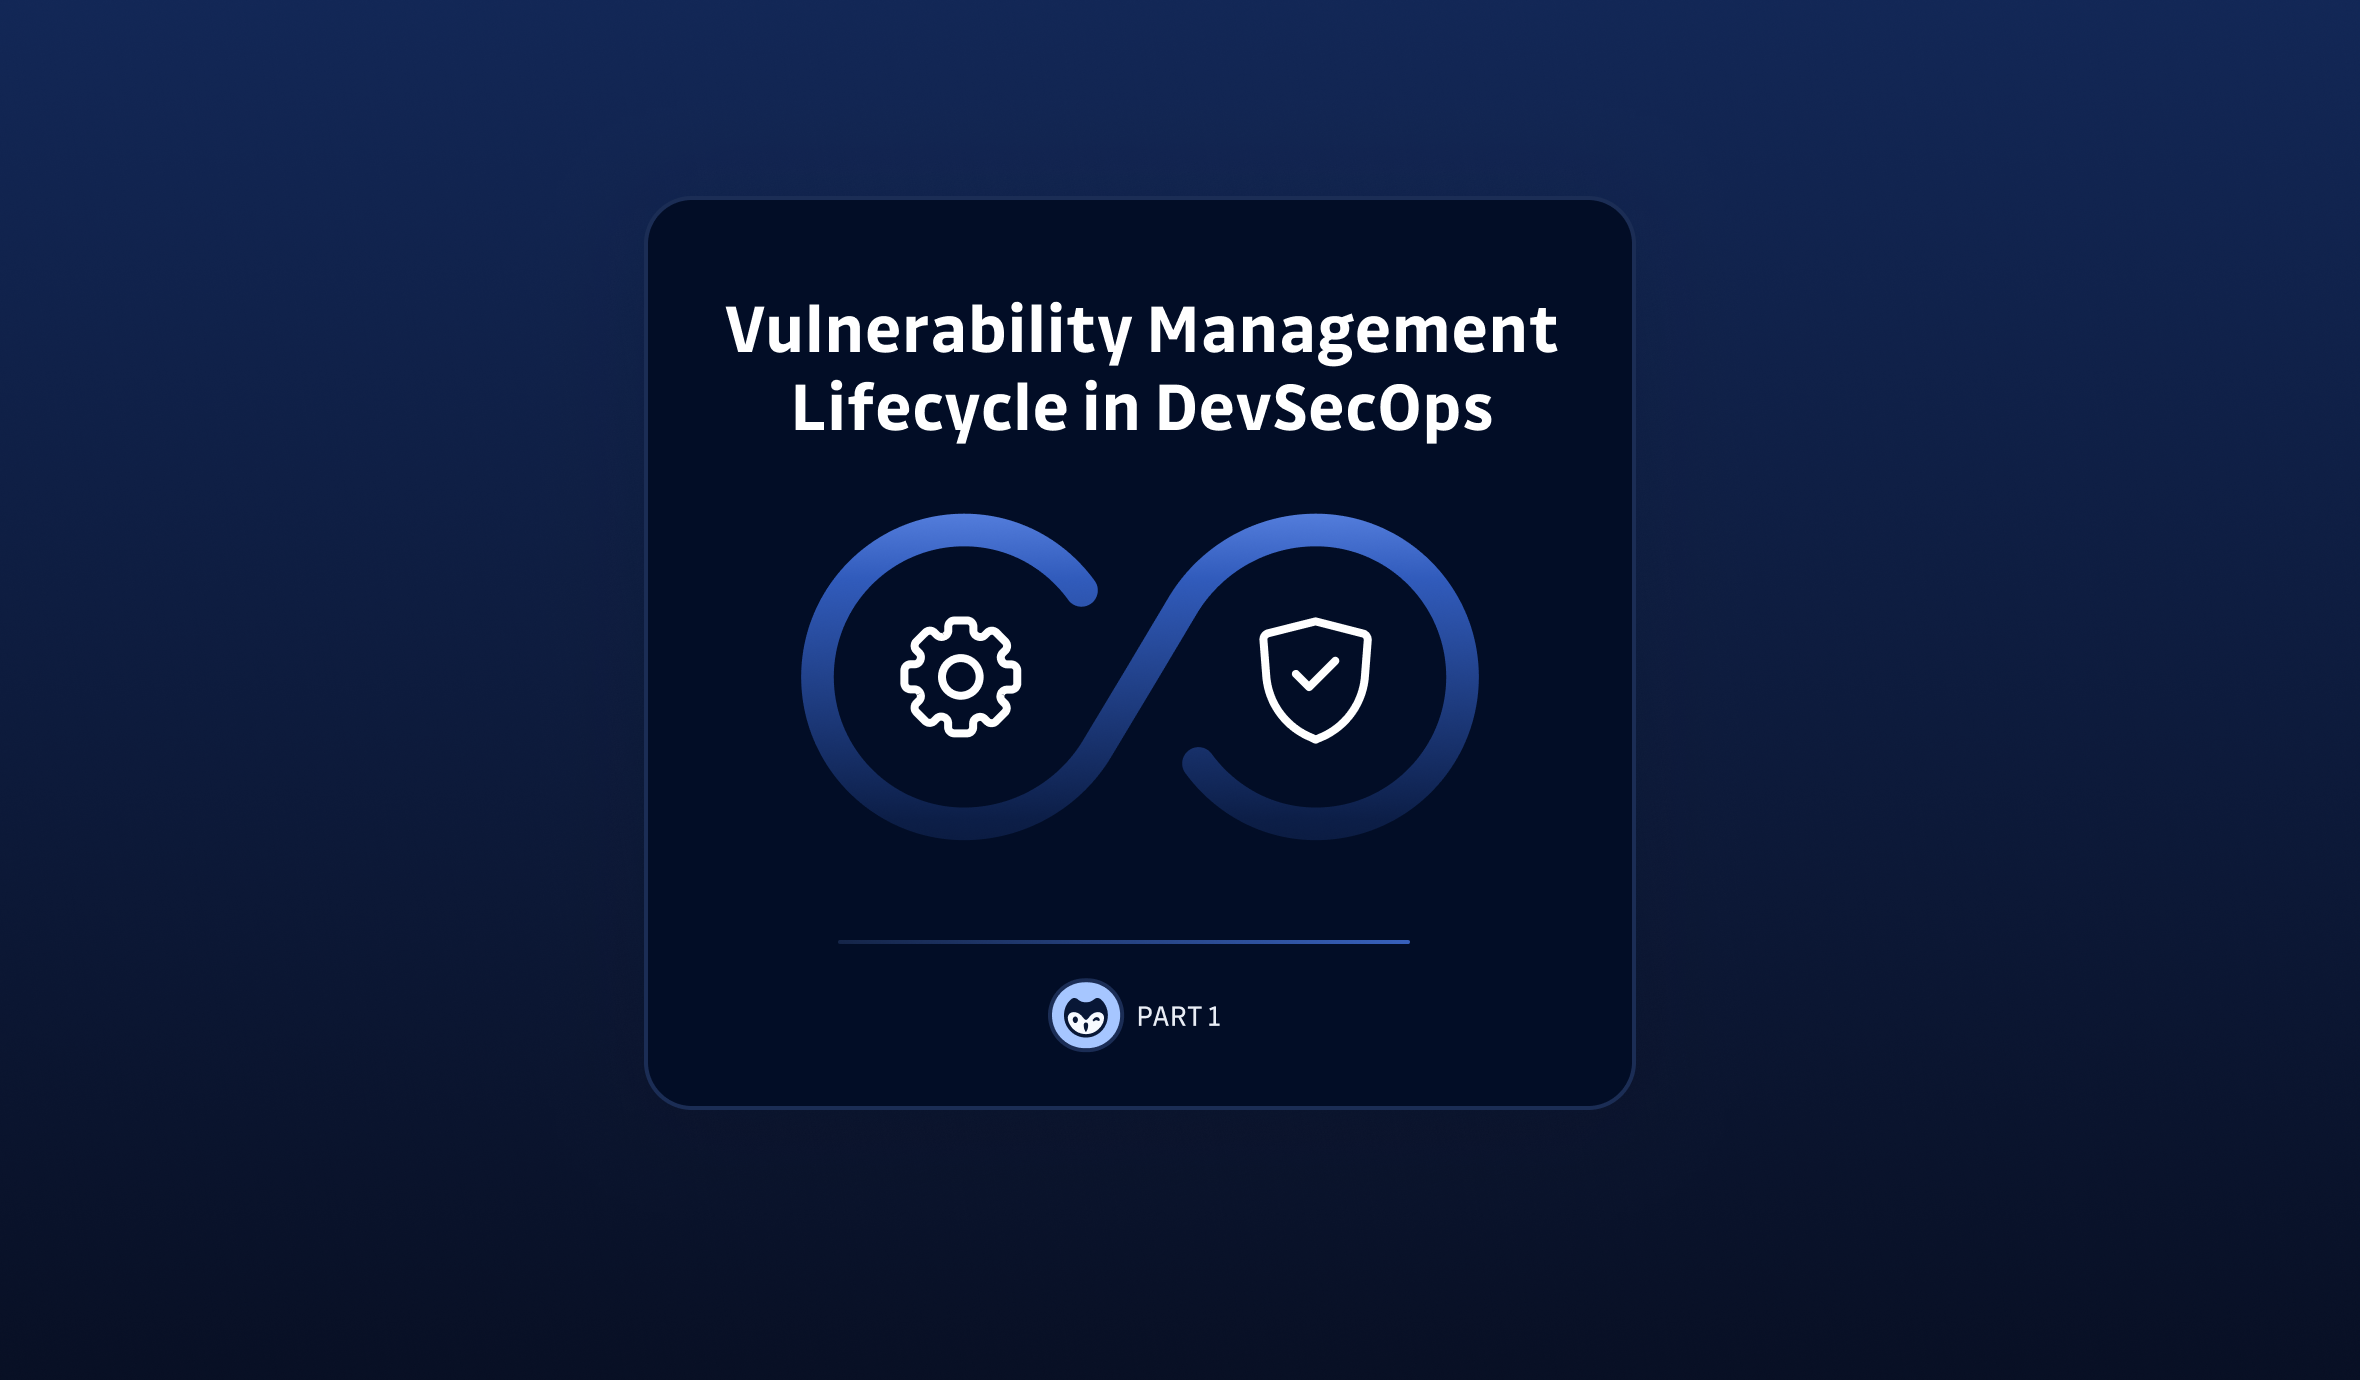 Vulnerability Management Lifecycle in DevSecOps